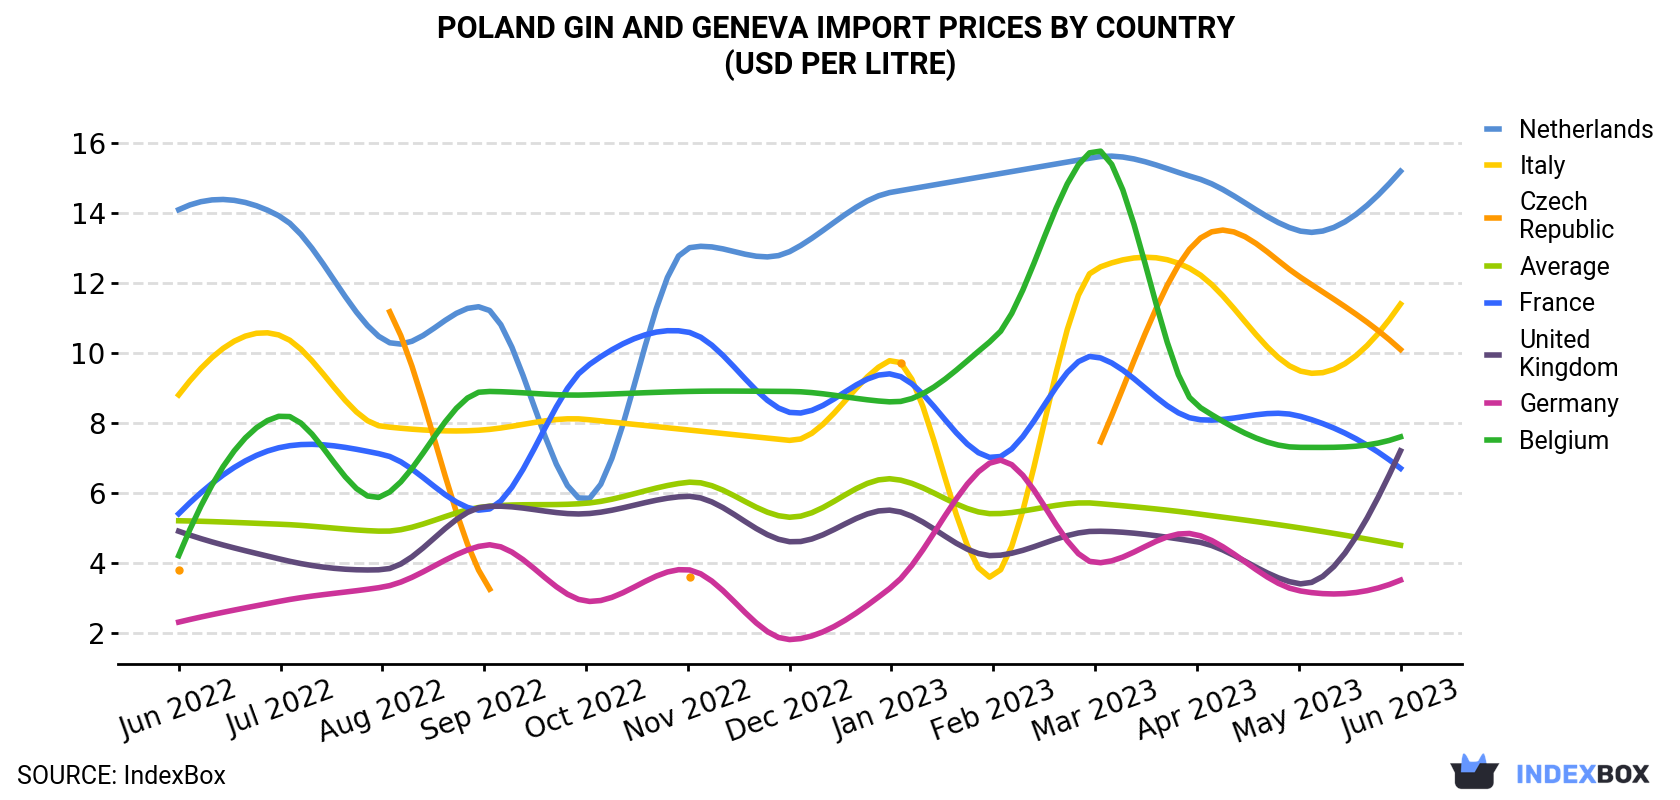 Poland Gin And Geneva Import Prices By Country (USD Per Litre)